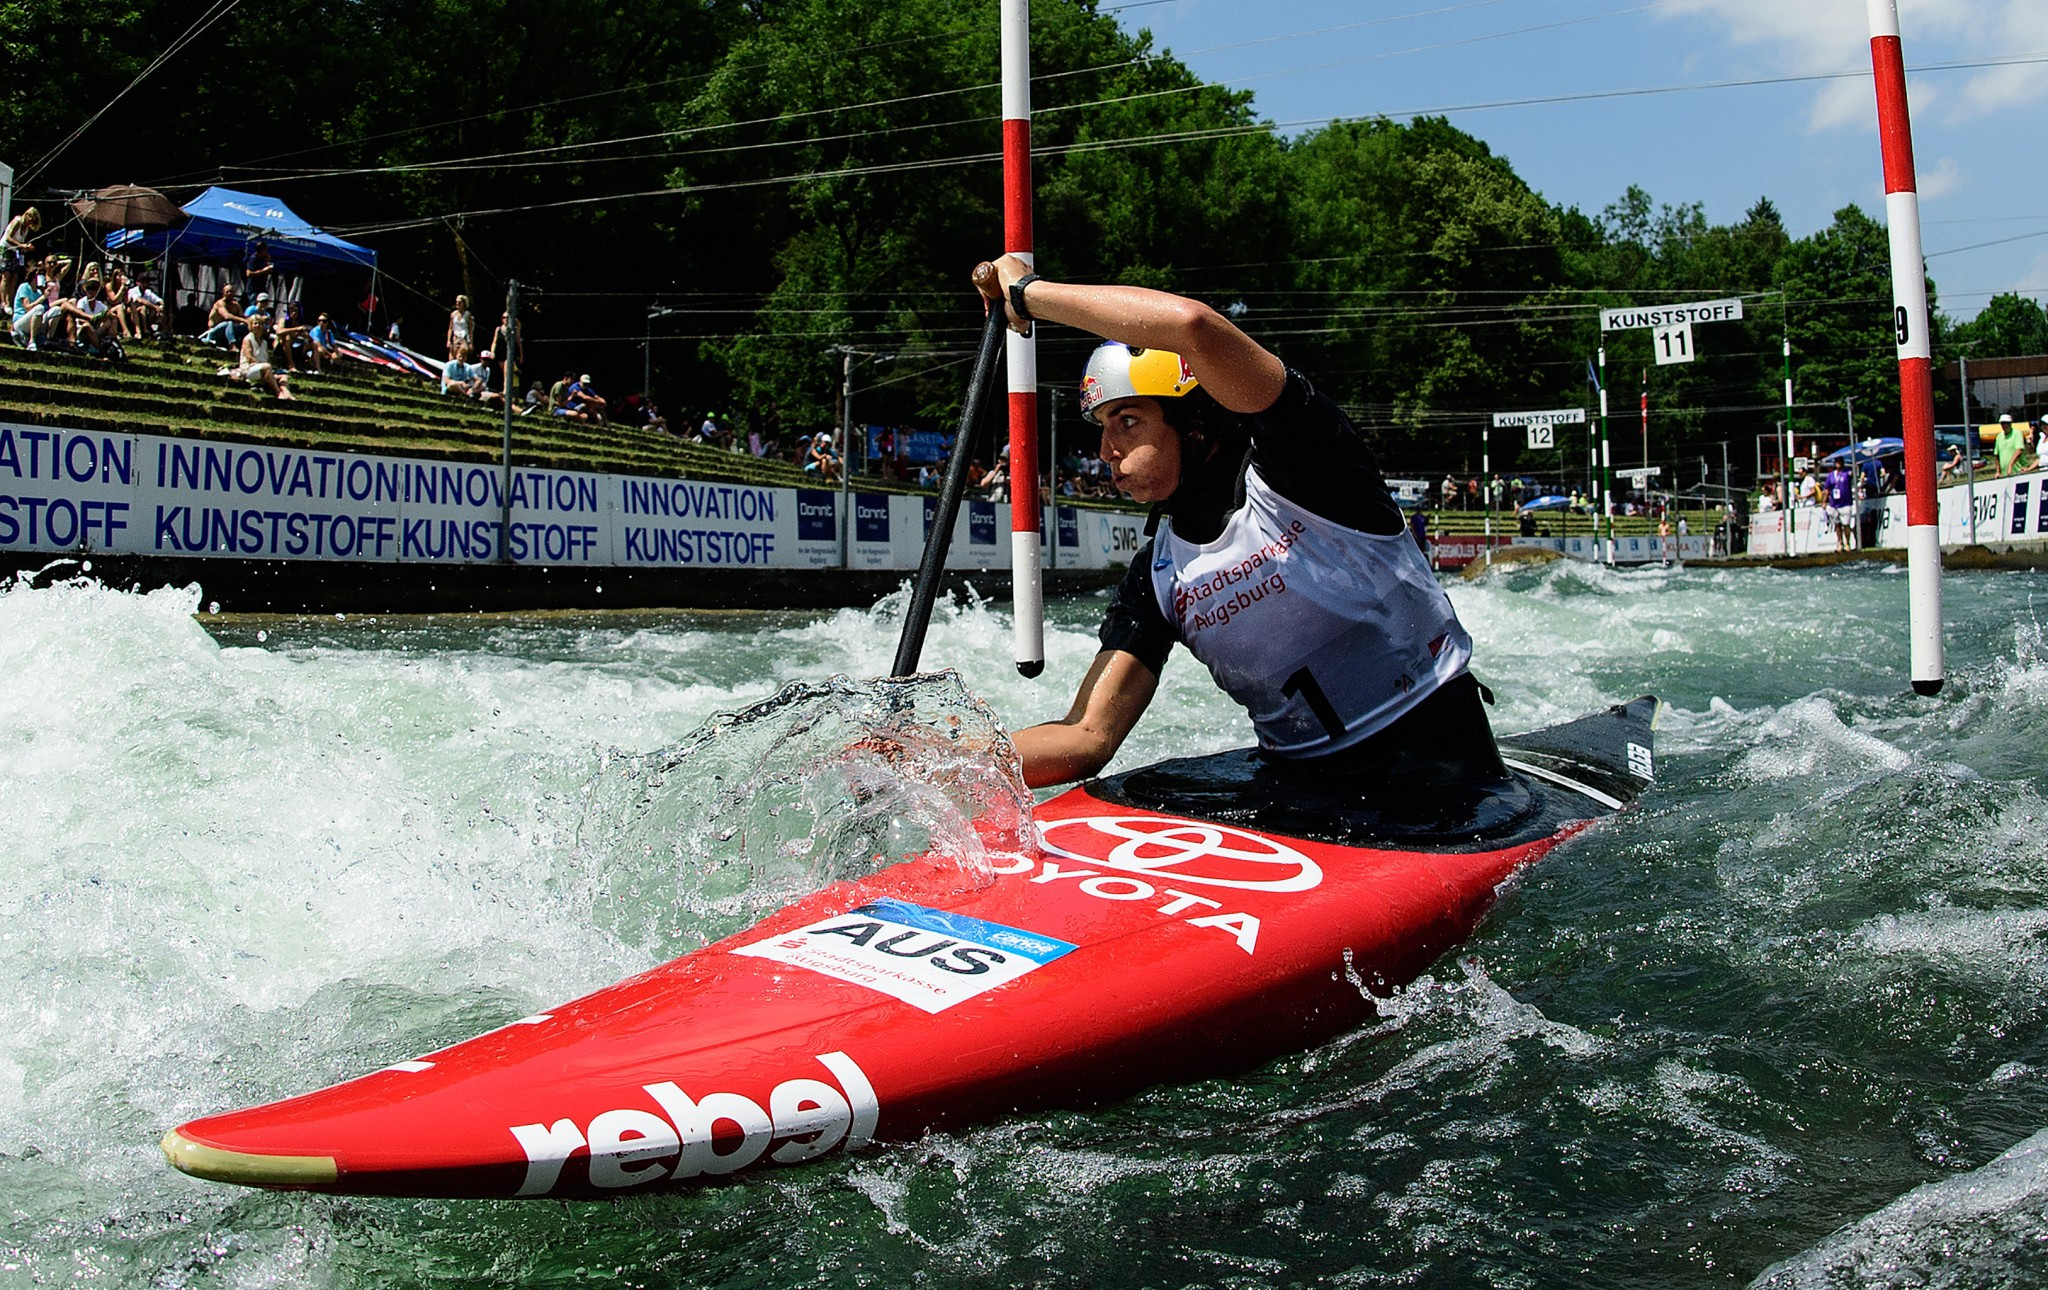 Fox aiming to extend series lead at Canoe Slalom World Cup in Ivrea